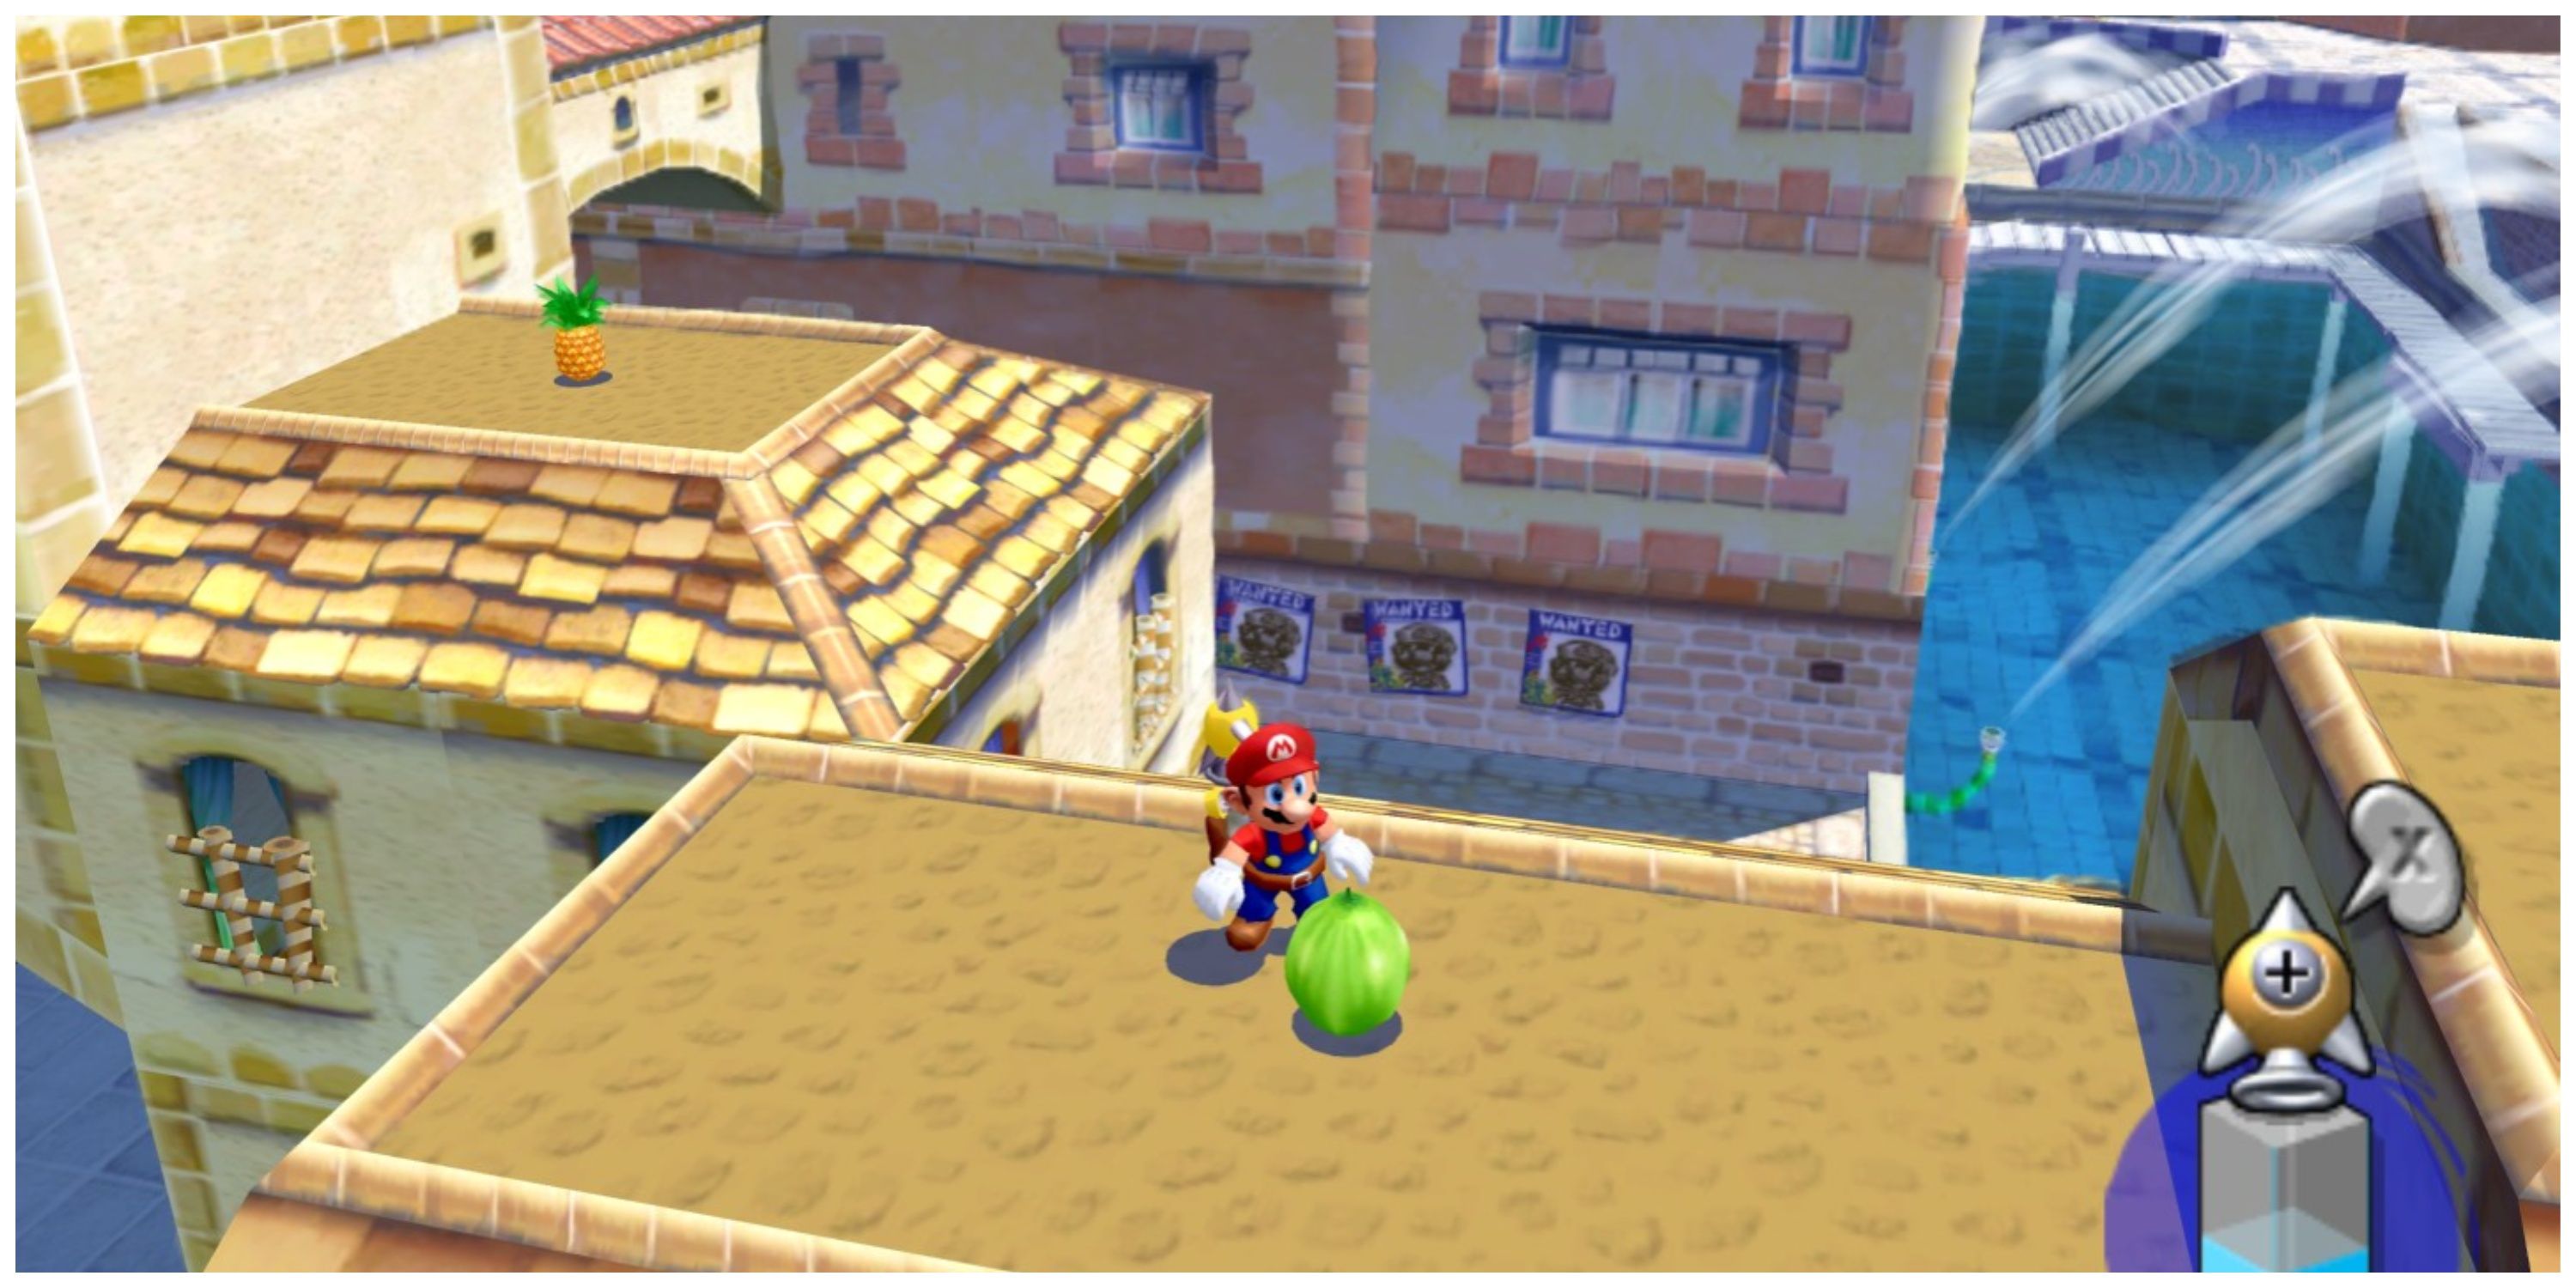 Super Mario Sunshine - Mario Standing On A Rooftop